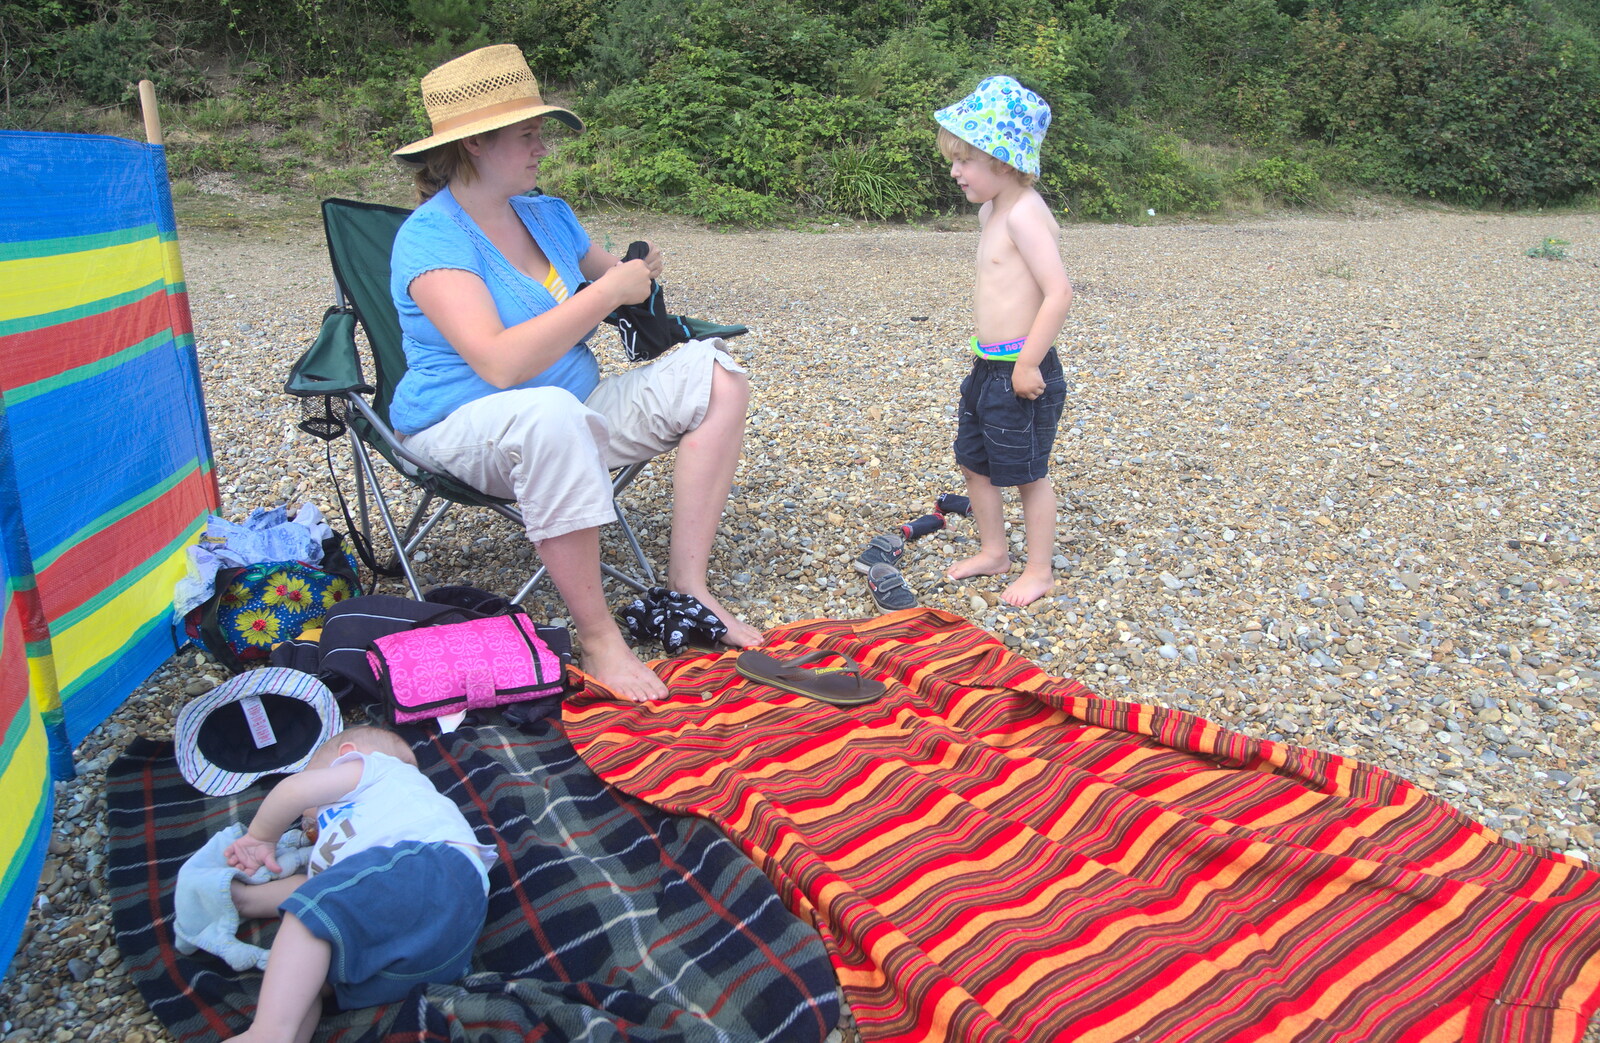 Our beach den from Camping by the Seaside, Cliff House, Dunwich, Suffolk - 15th August 2012